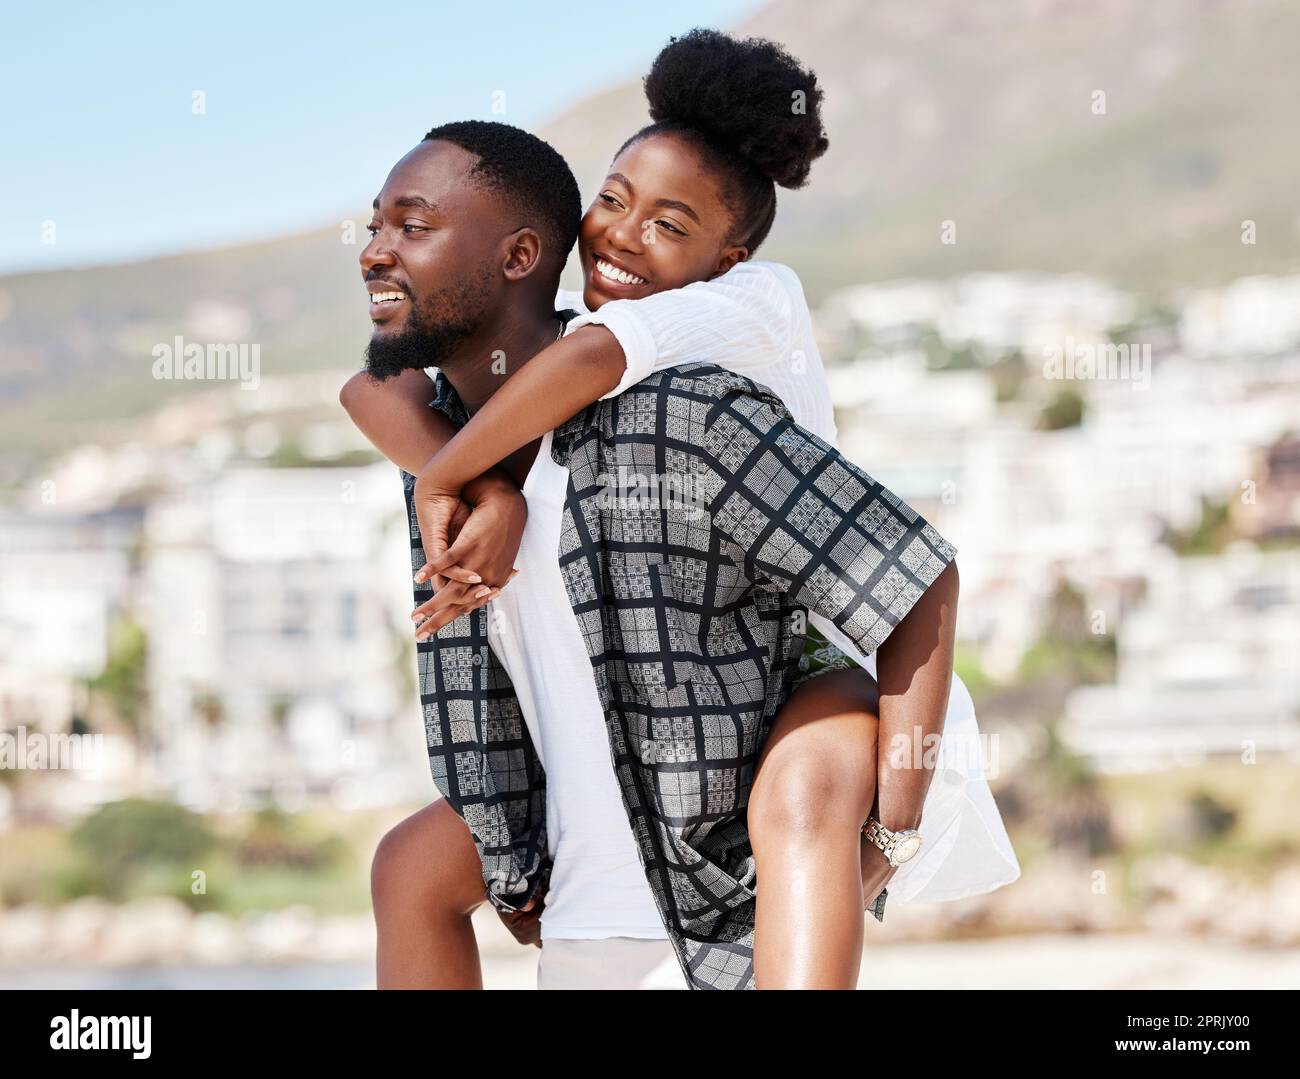 Love, couple and beach with a playful man and woman enjoying a holiday or vacation on the coast together. Travel, summer and romance with a boyfriend and girlfriend bonding outside during a sunny day Stock Photo